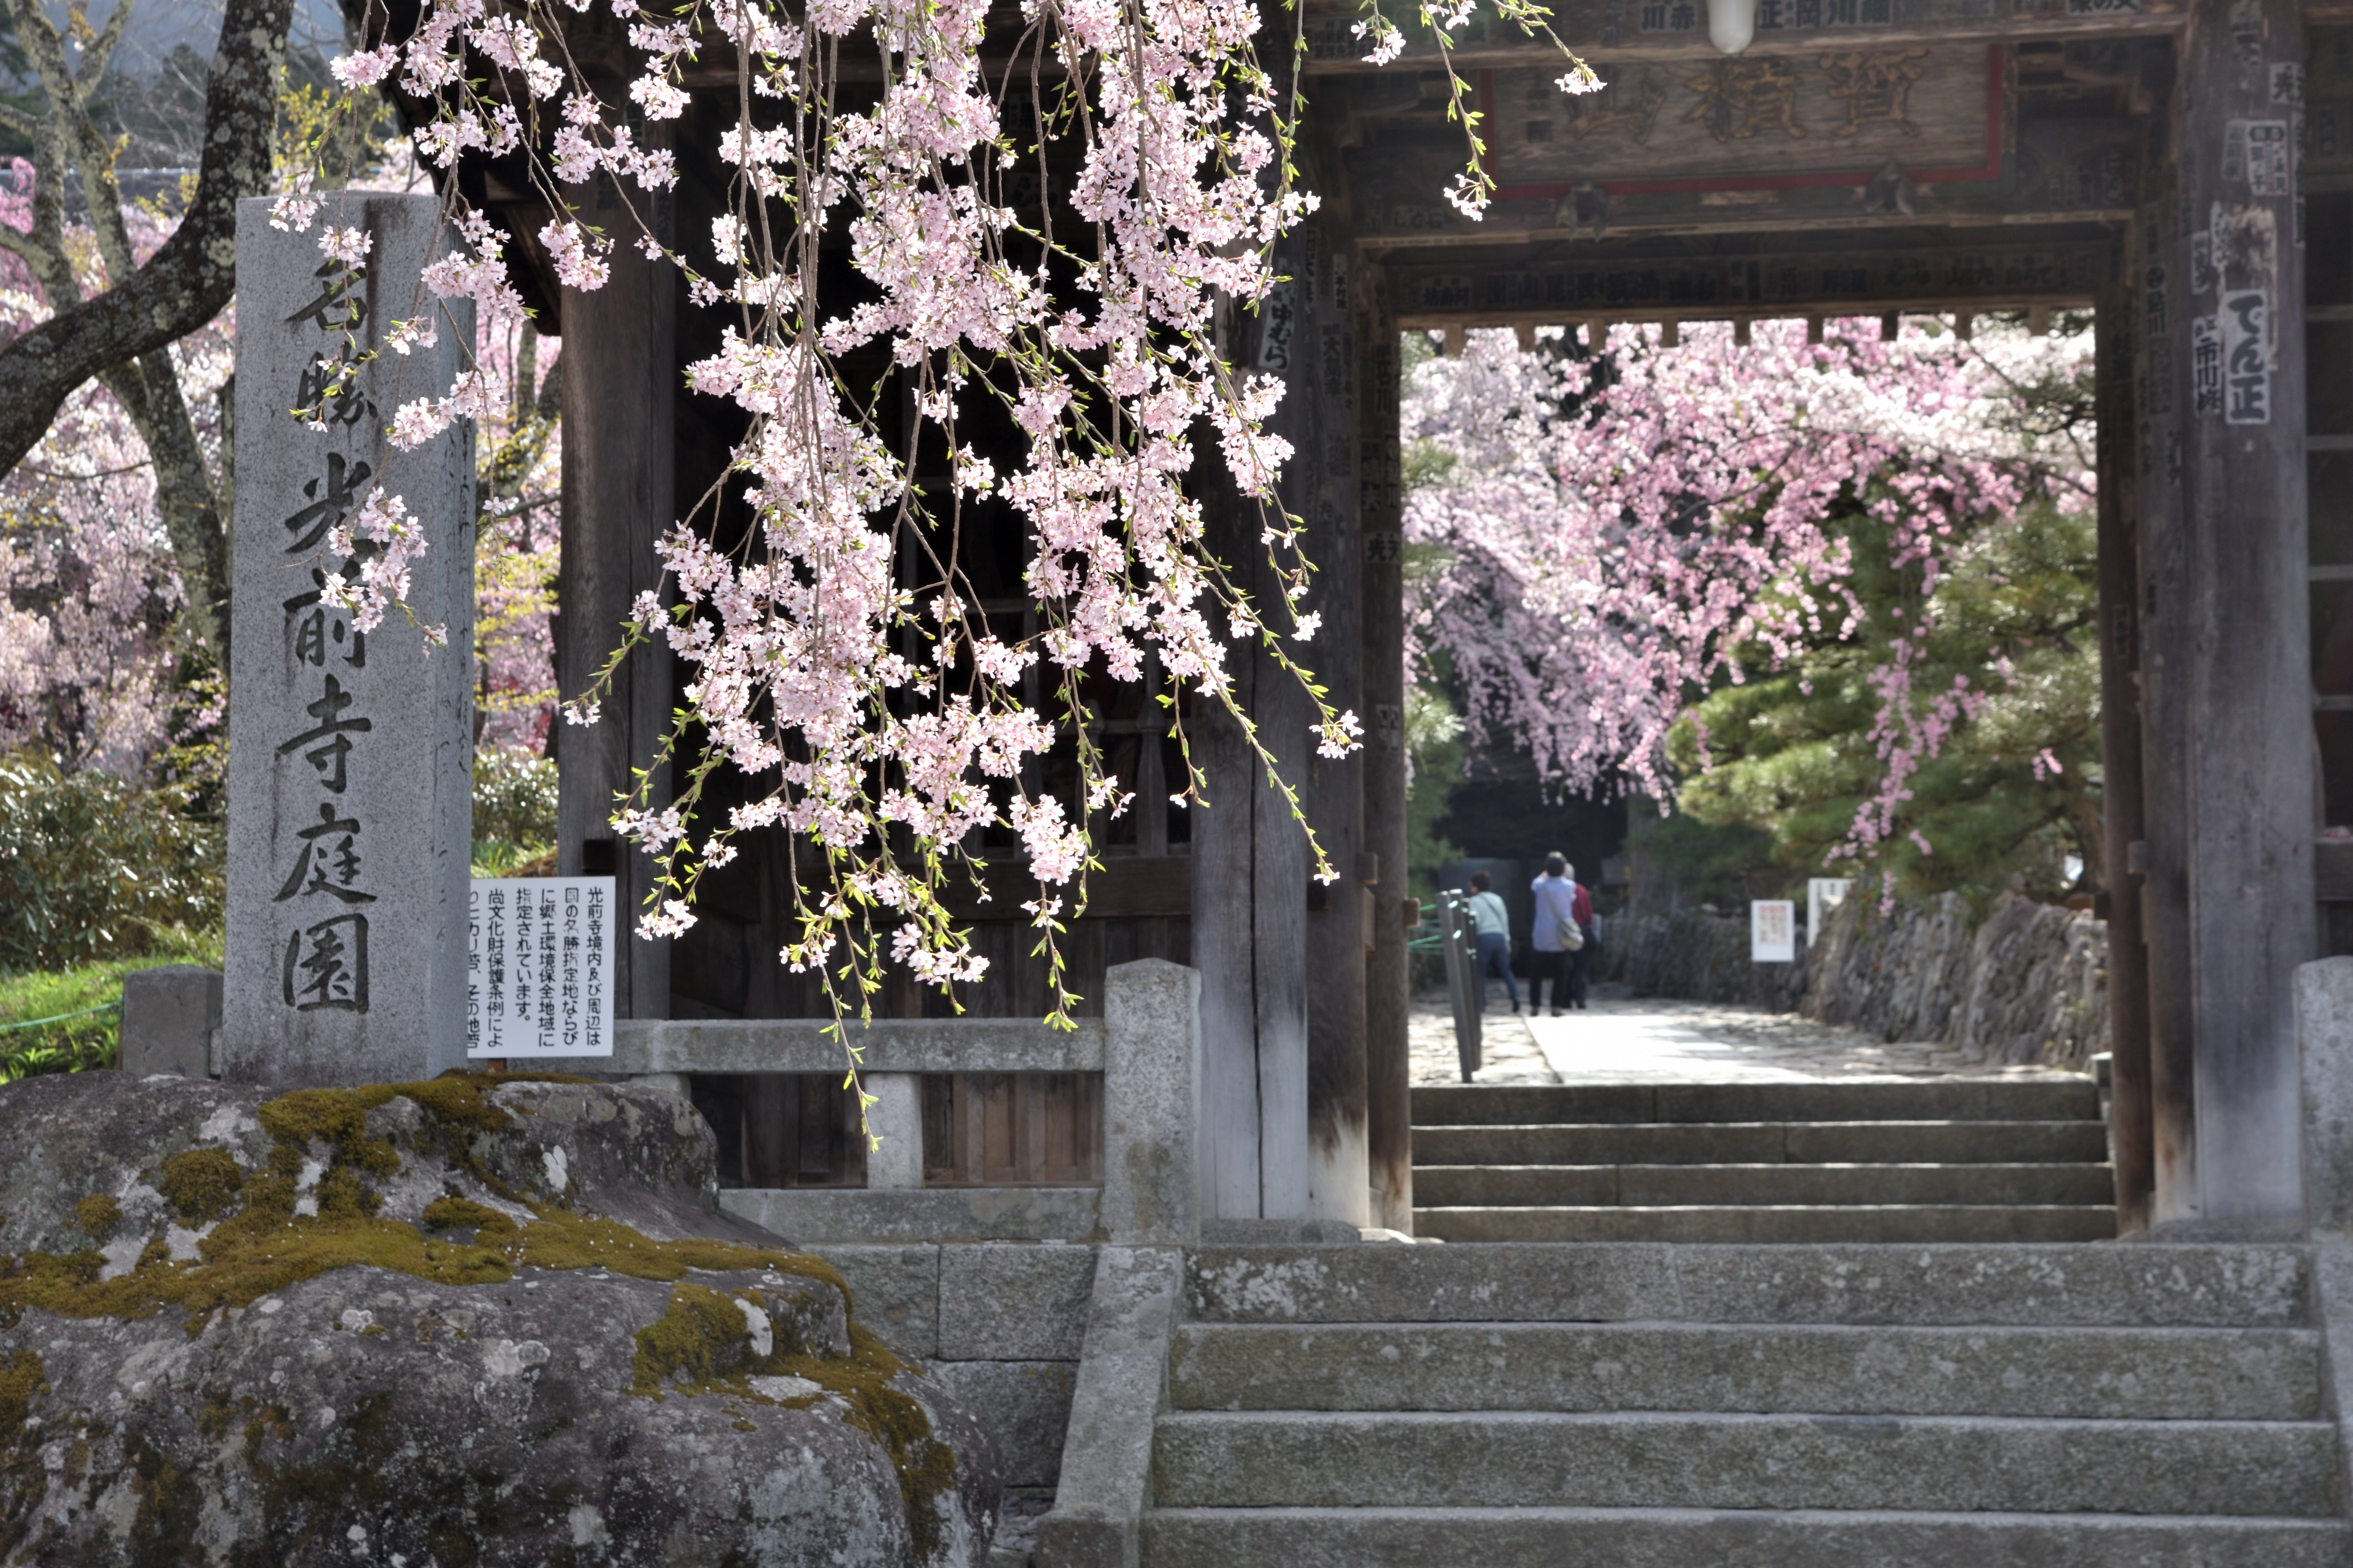 Weeping cherry trees on the gate of Kozenji temple